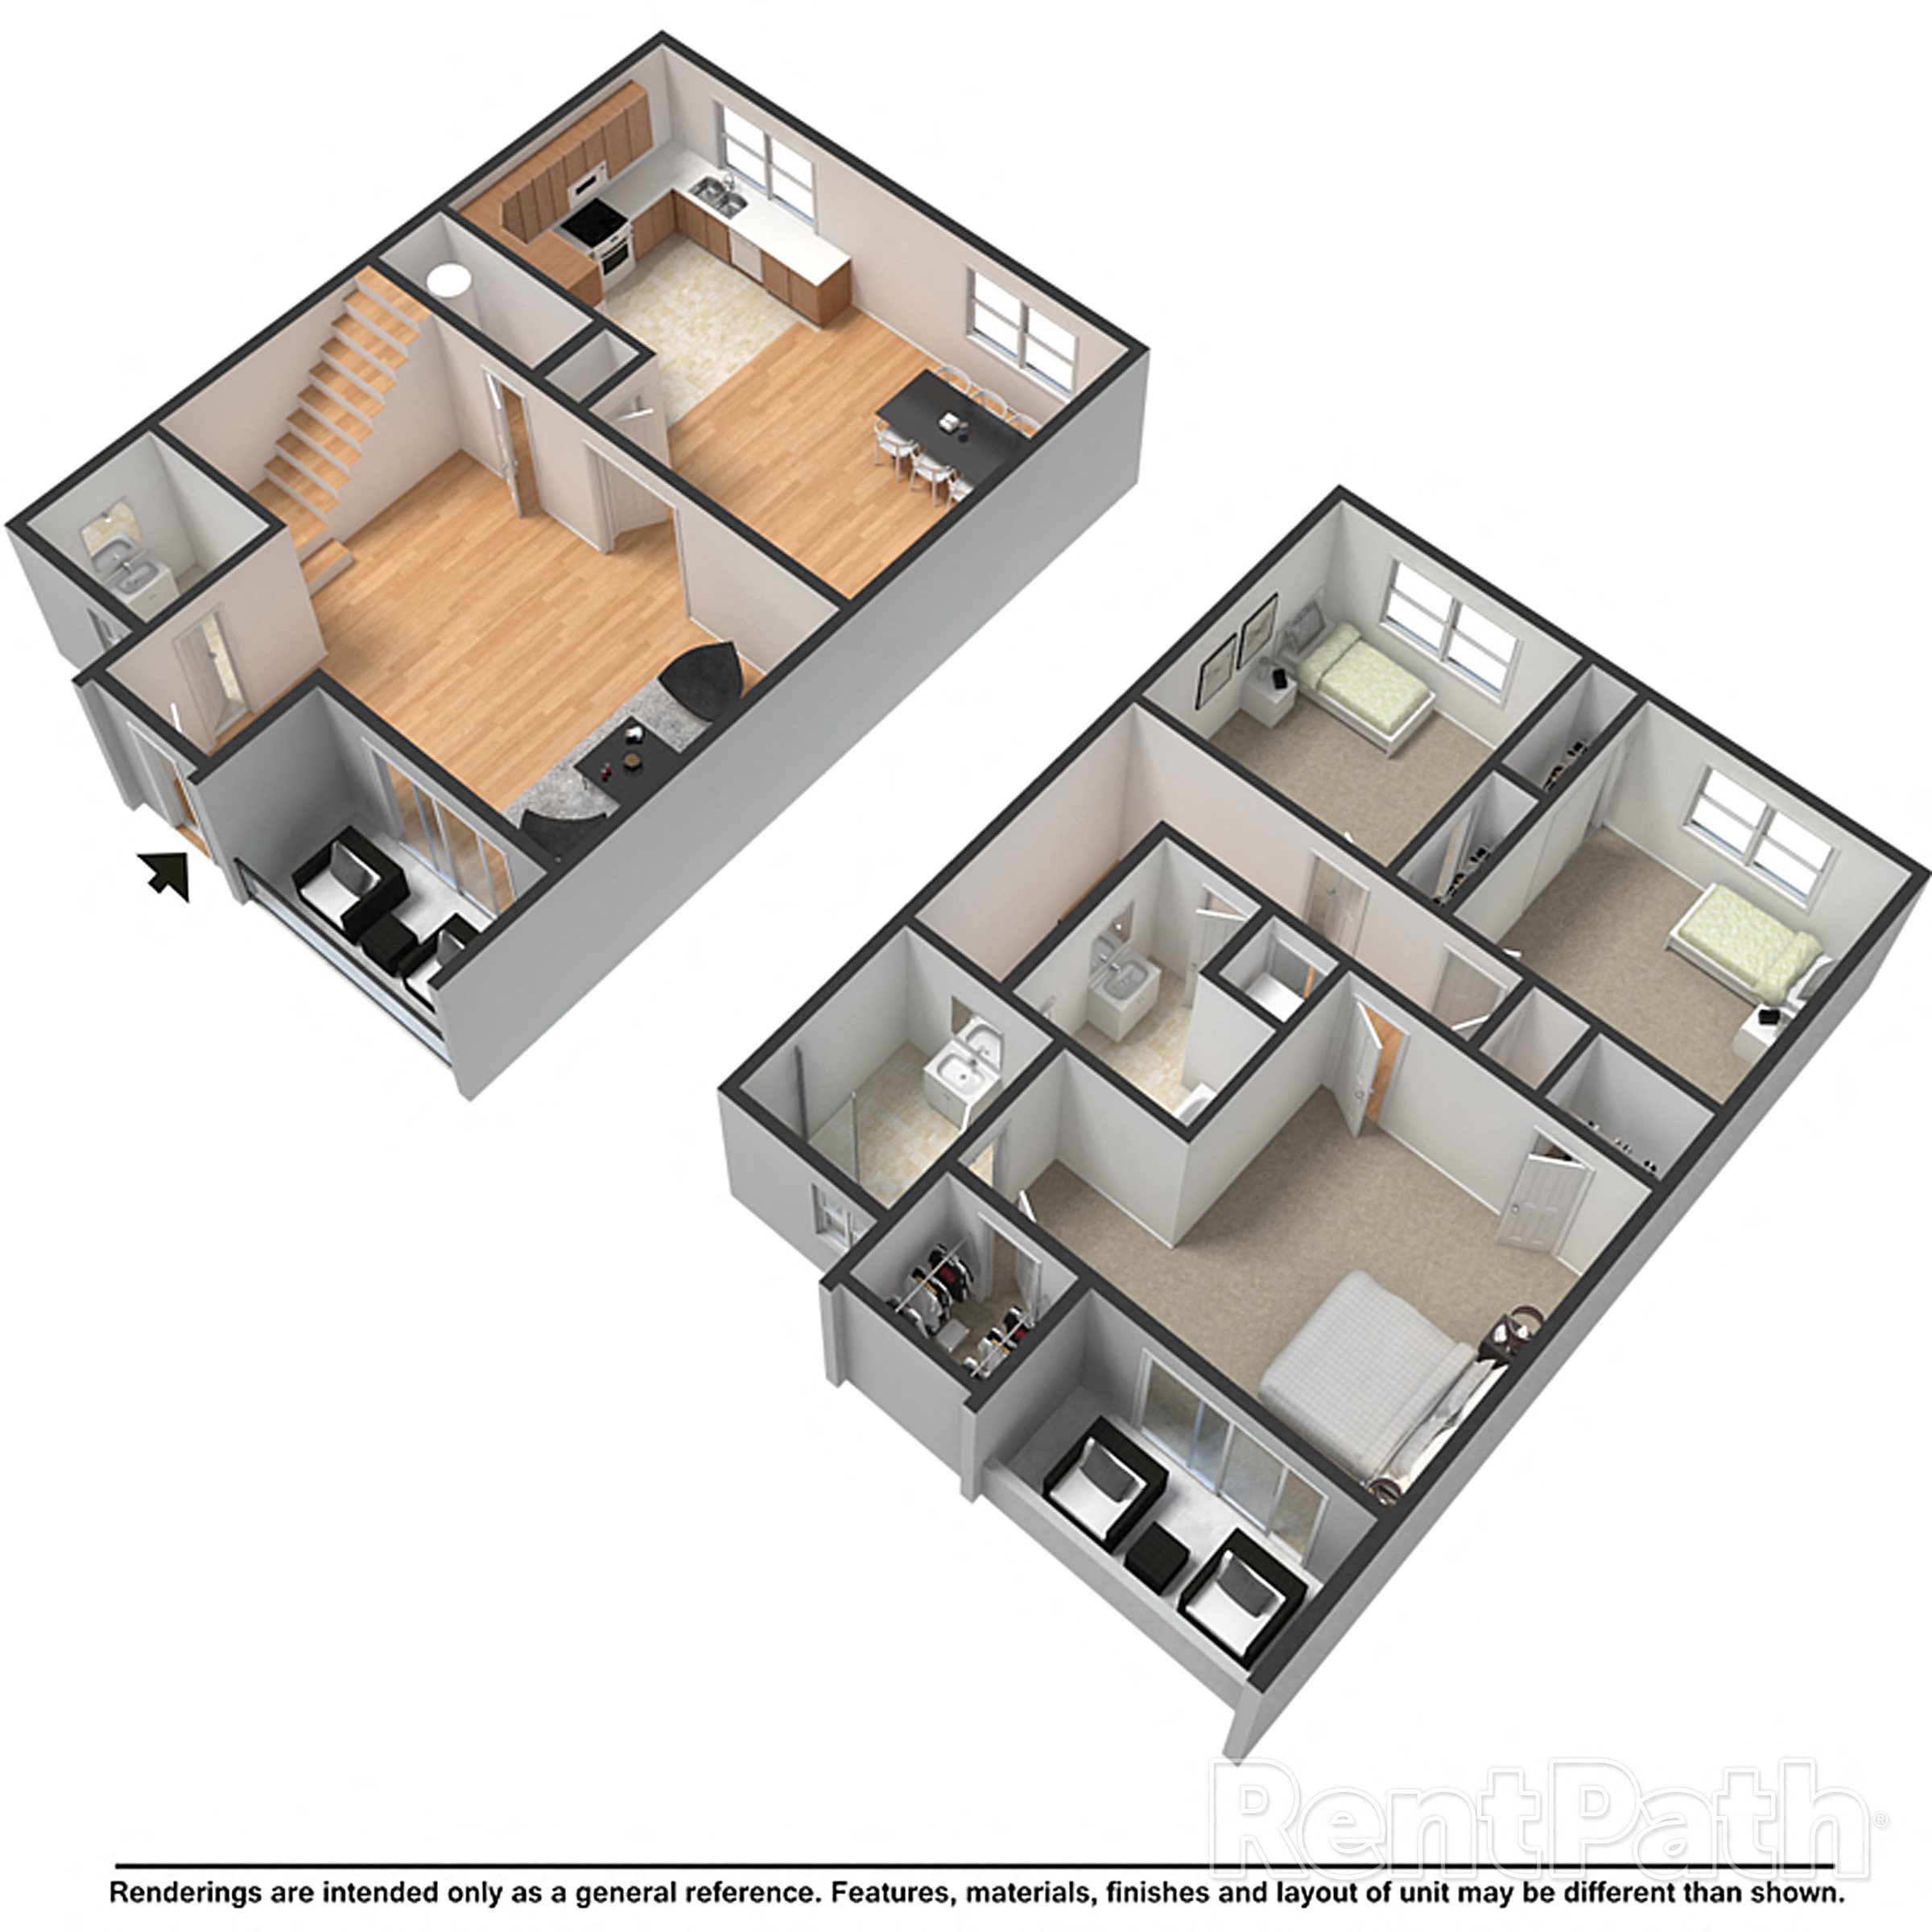 Floor Plans of Bixby Hill Apartments in Long Beach, CA